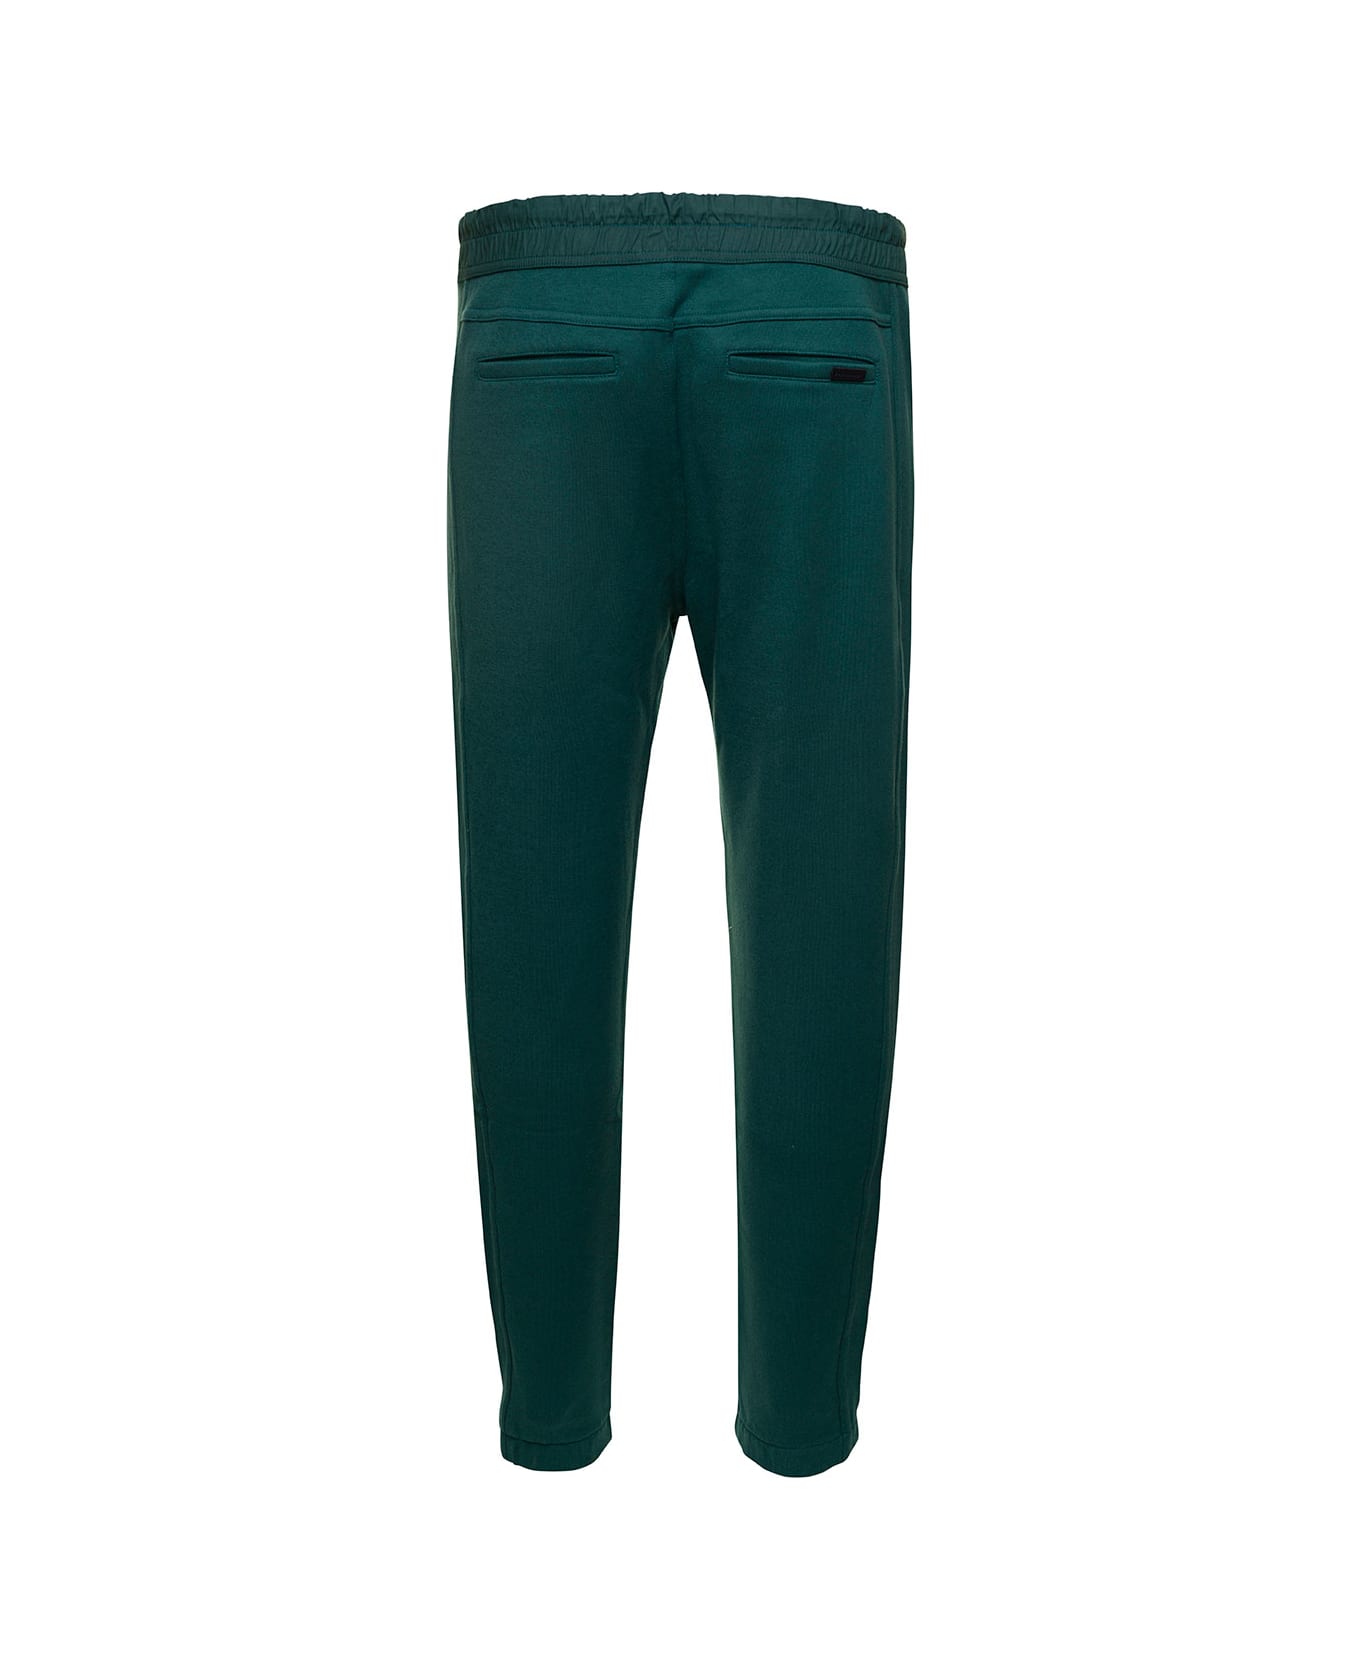 Saint Laurent Green Jogging Pants With Drawstring And Logo Embroidery In Cotton Man - Green